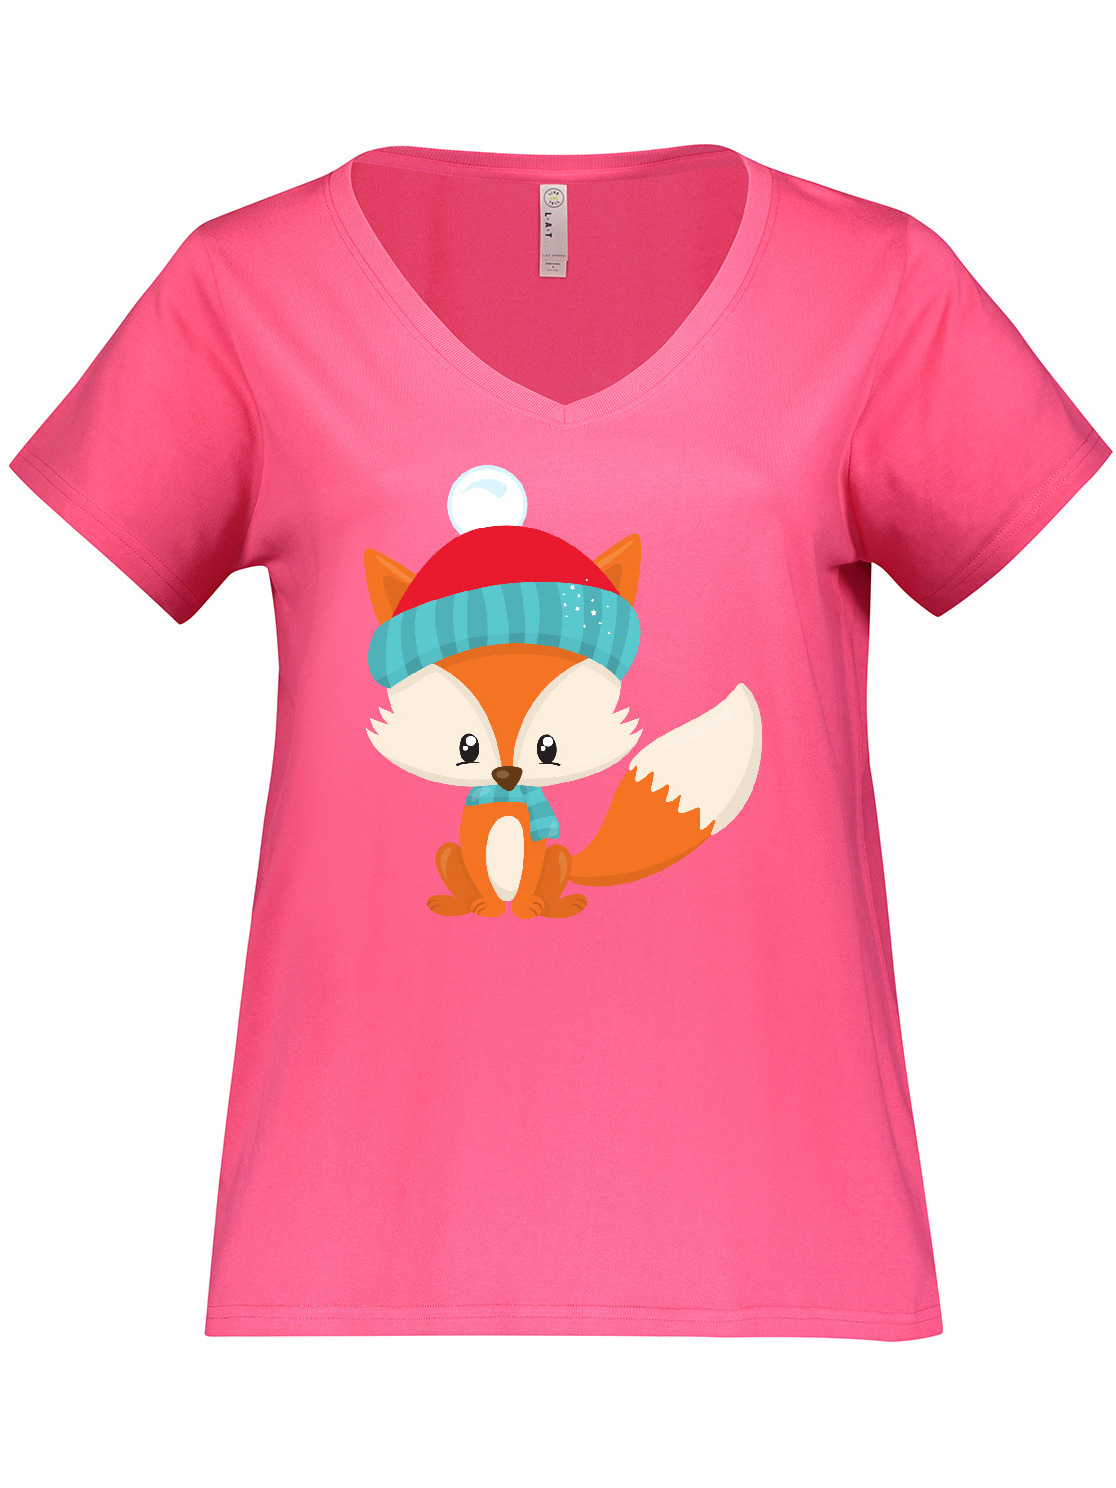 Inktastic Cute Fox, Fox With Hat And Scarf, Orange Fox Women's Plus Size V-Neck T-Shirt - image 1 of 4